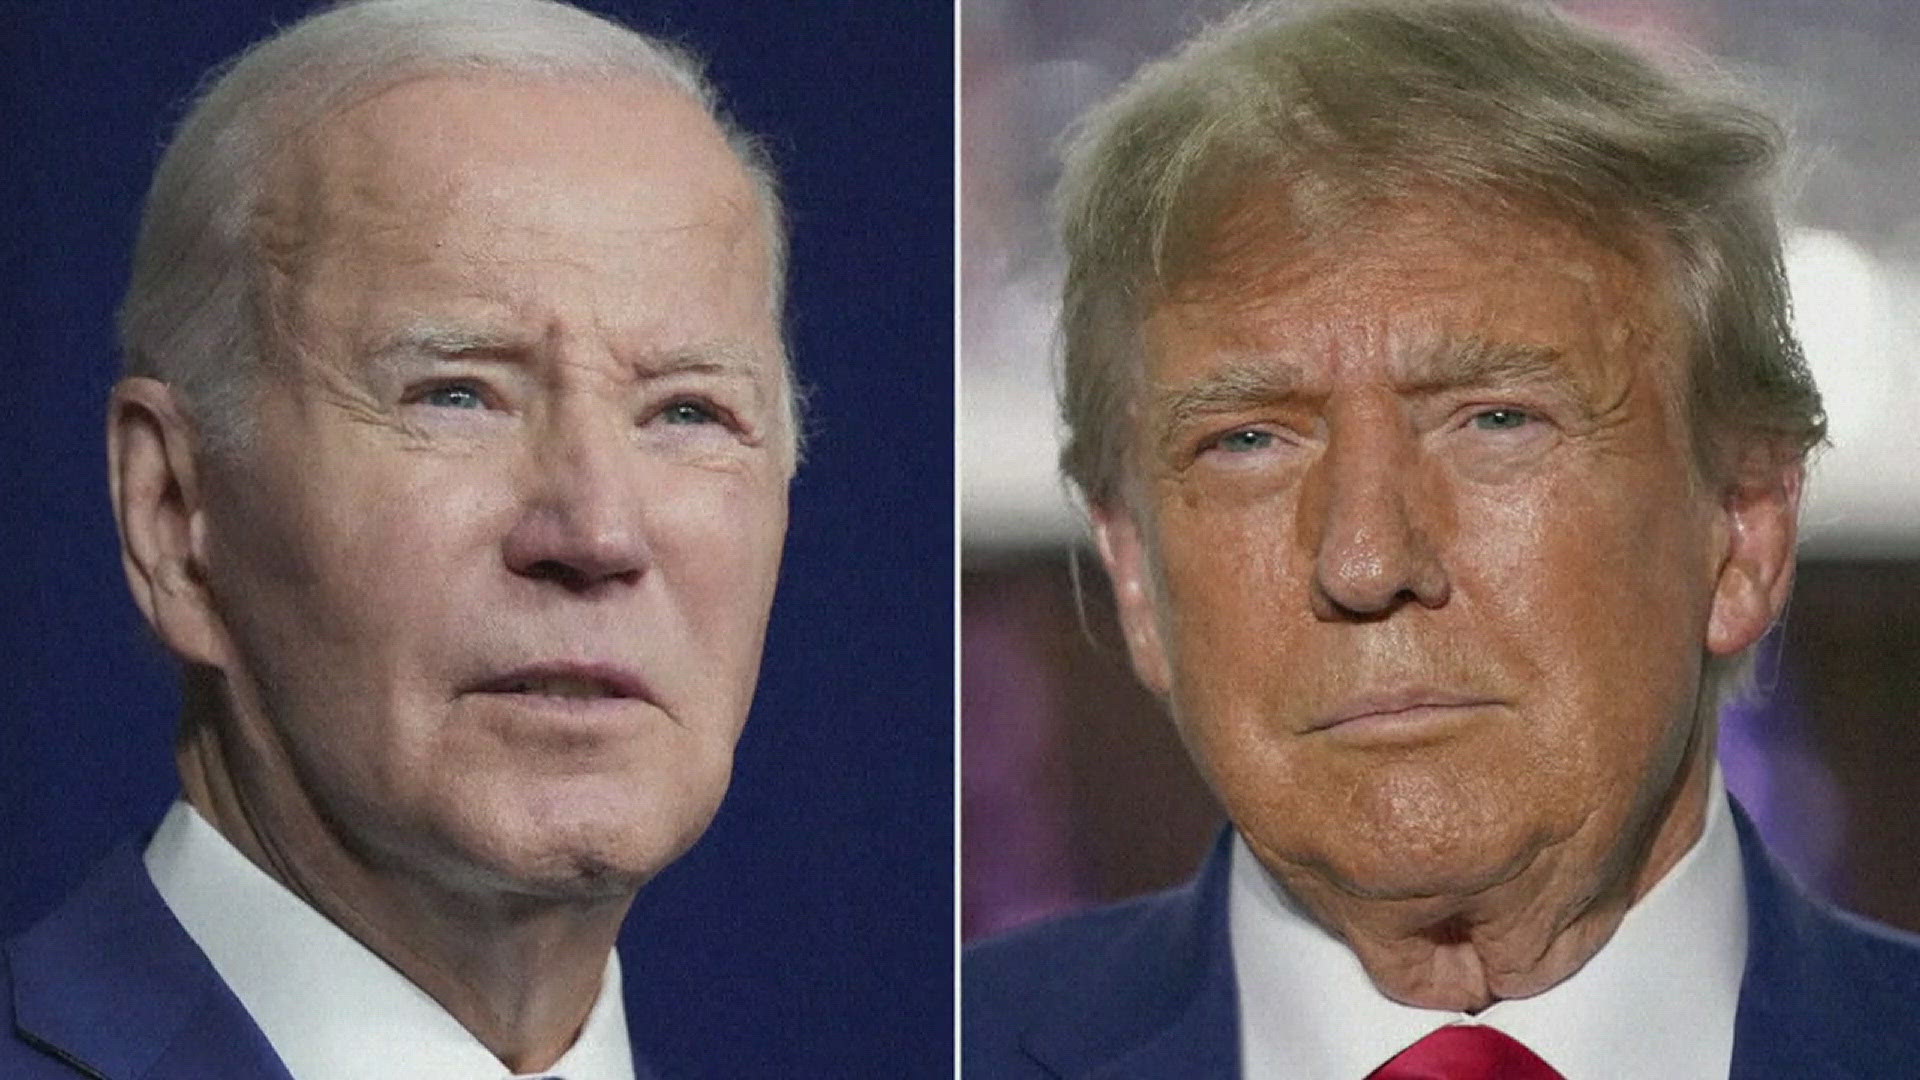 Biden appeared in Los Angeles with former President Obama discussing the overturning of Roe, while Trump advocated to Detroit voters about border control.